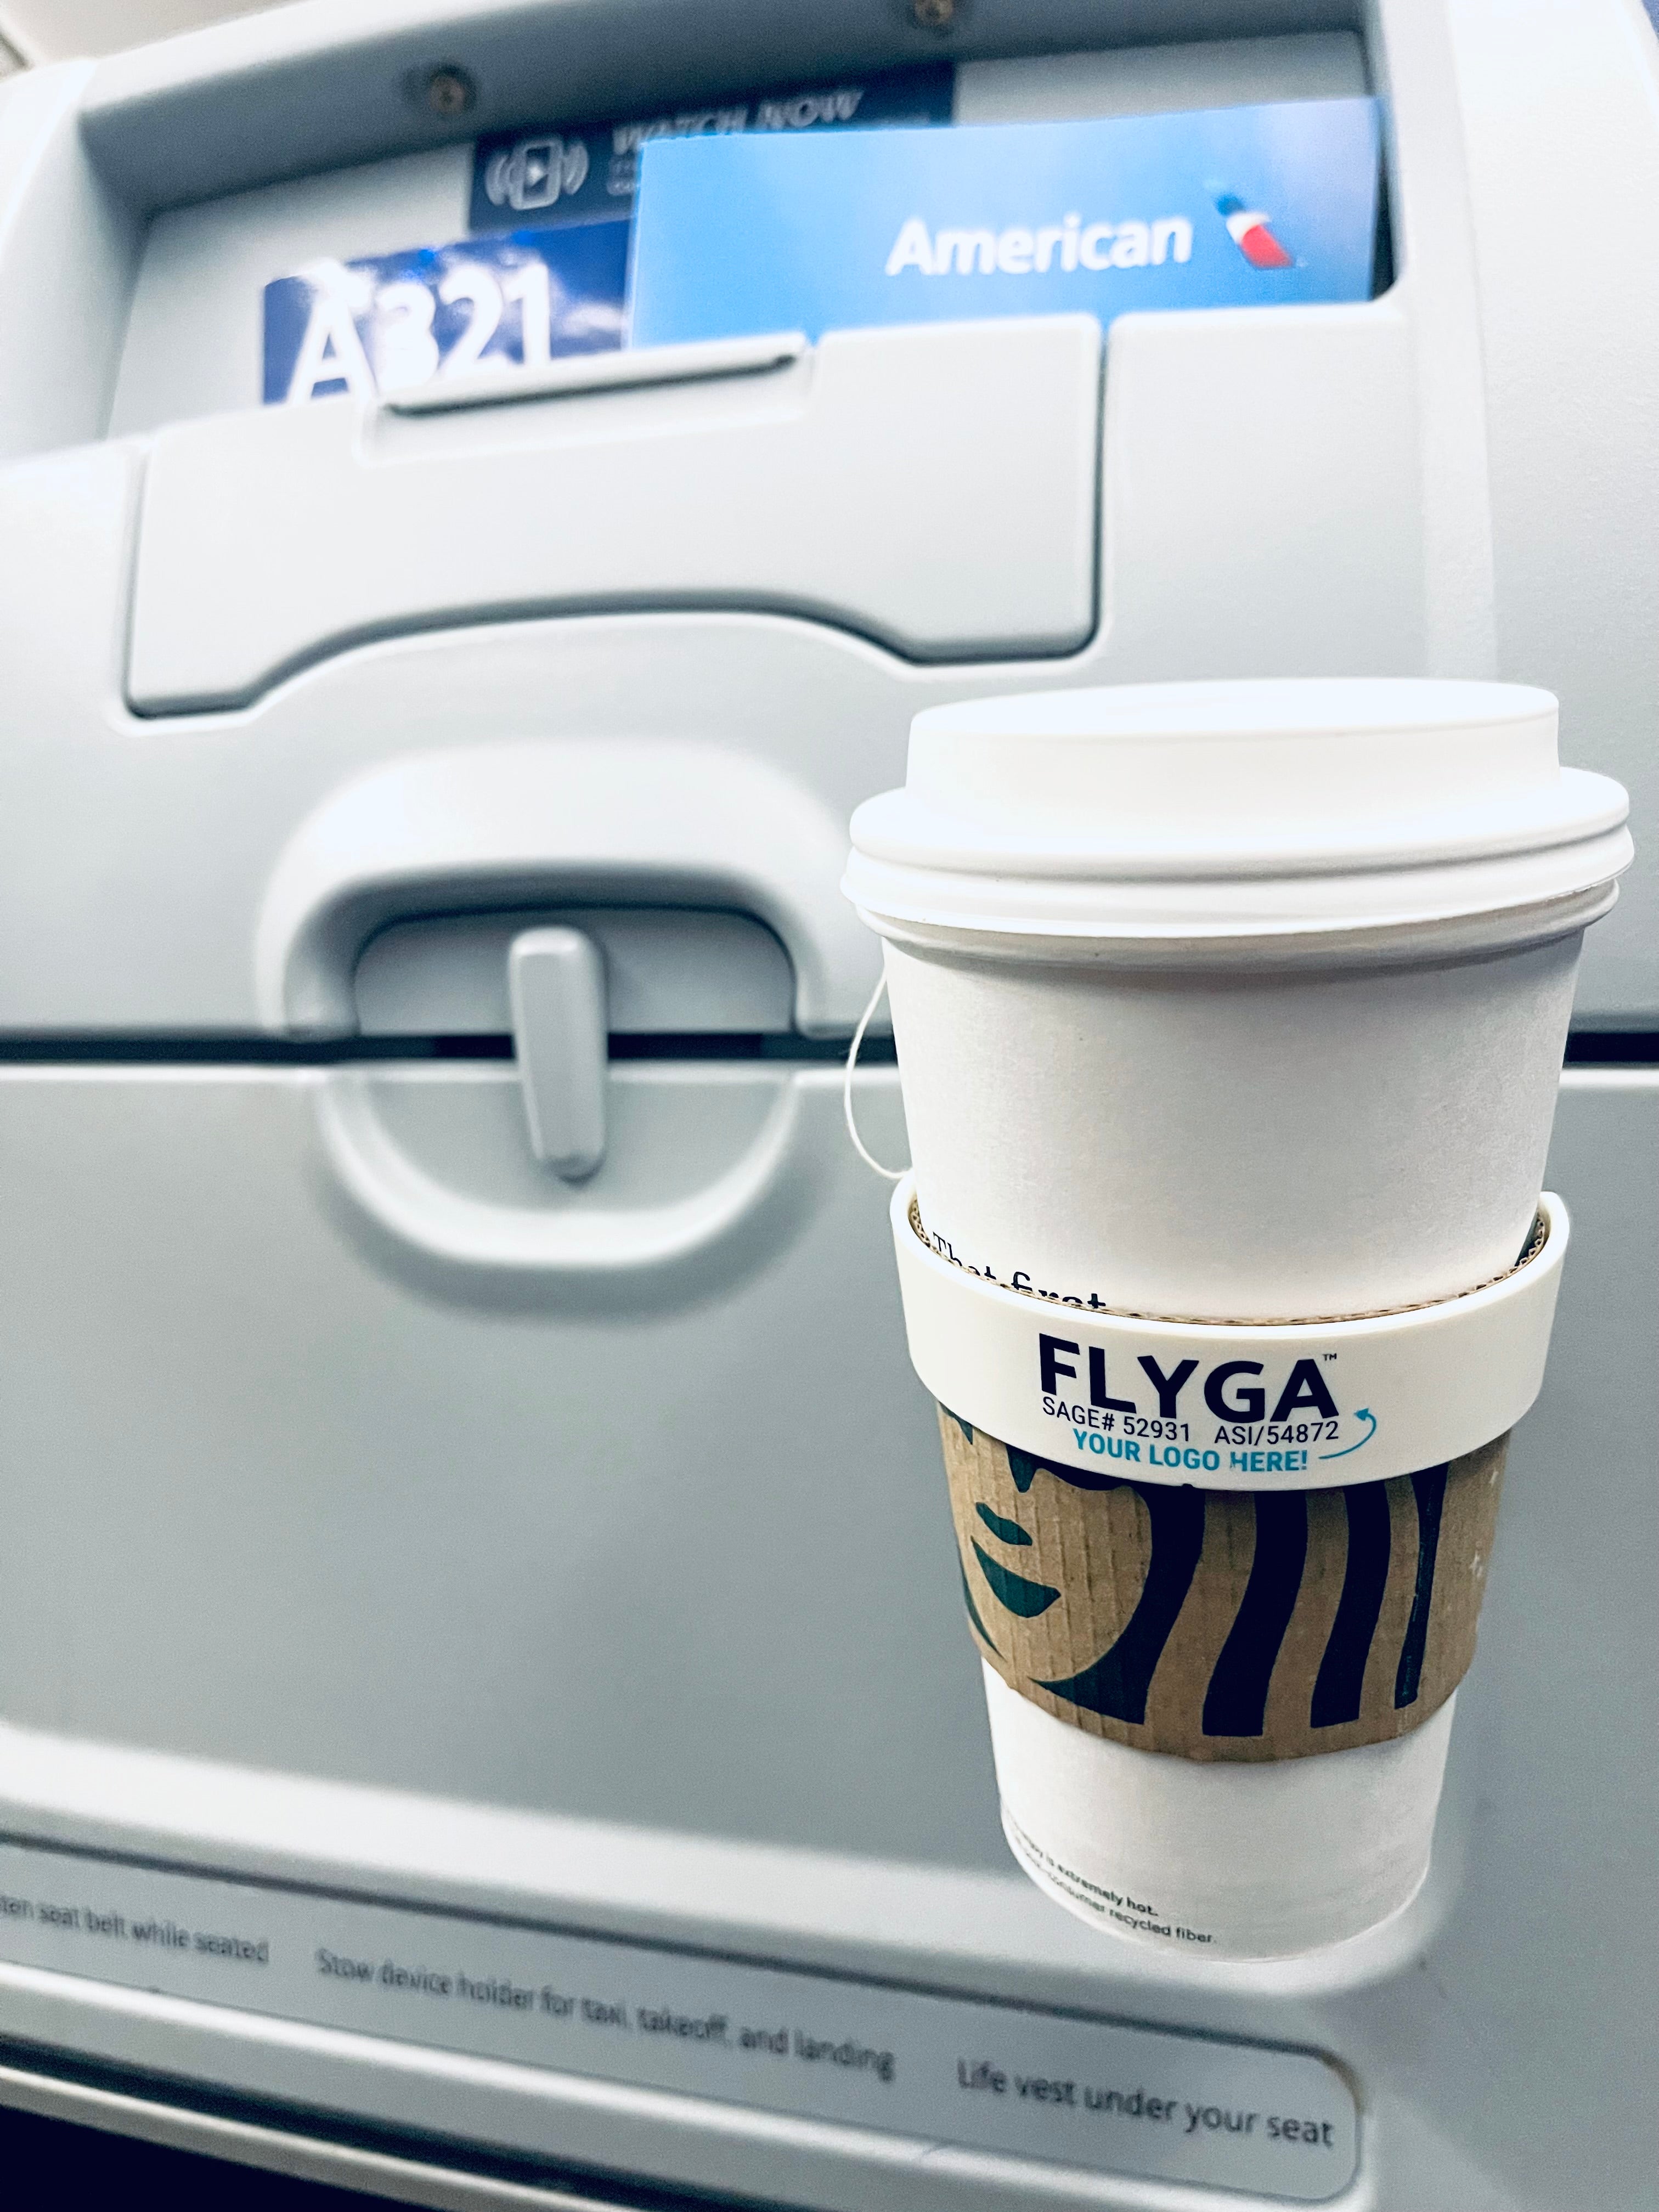 FLYGA is taking off with Distributors